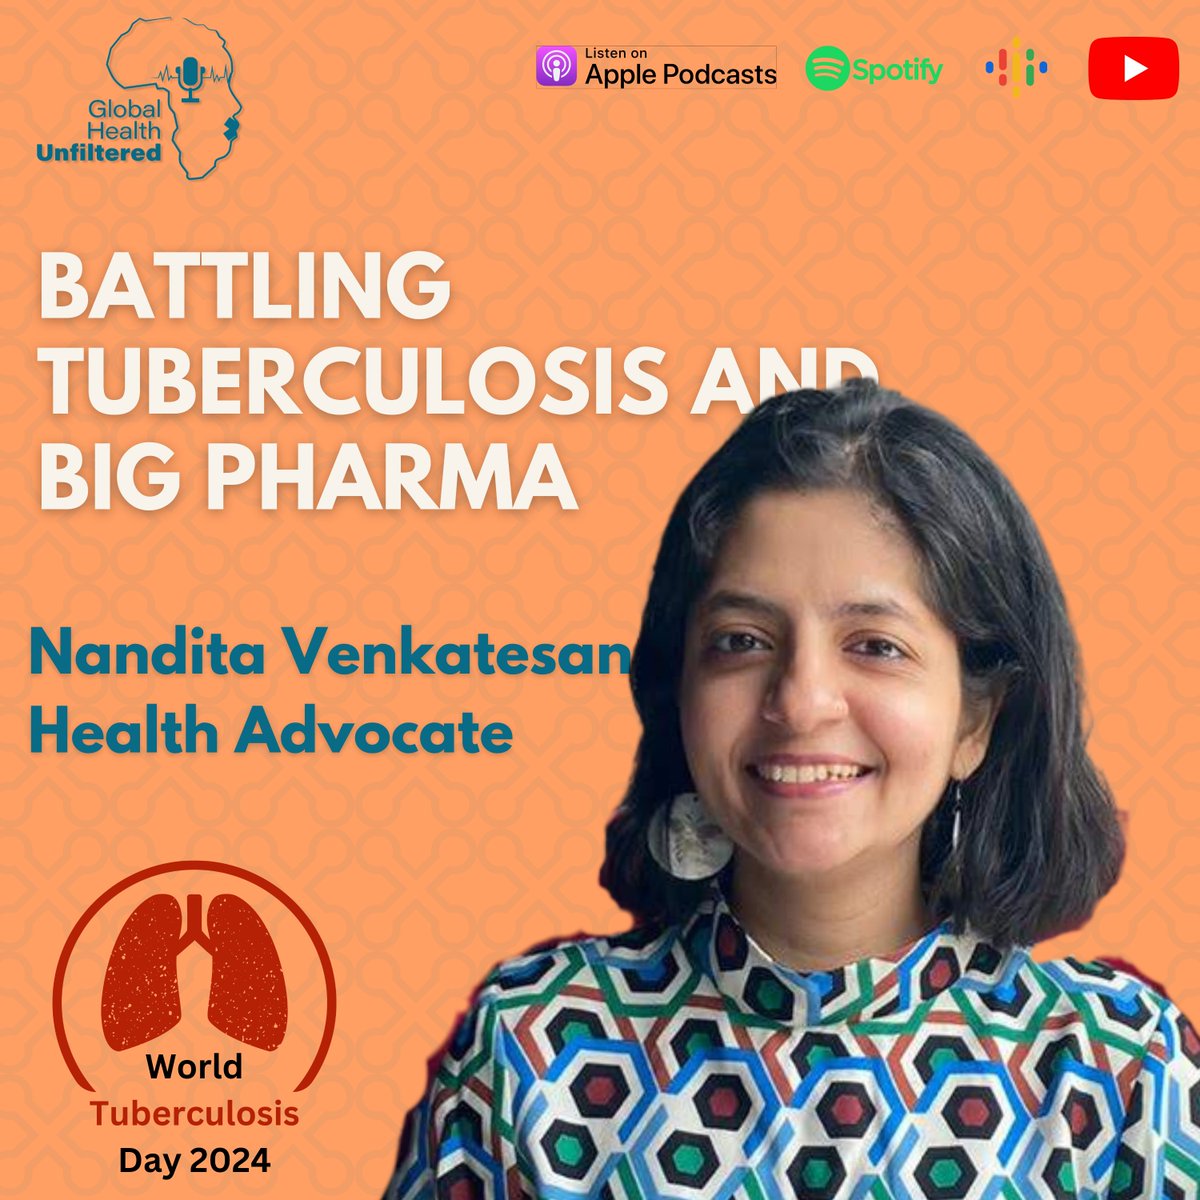 ‼️NEW EPISODE‼️ On #WorldTBDay, @nandita_venky shared her powerful story of overcoming TB and how she sued Johnson & Johnson to ensure access to affordable life-saving TB medication. #EndTB Listen now on any podcast app or globalhealthunfiltered.com Like, Share and Subscribe. 🙏